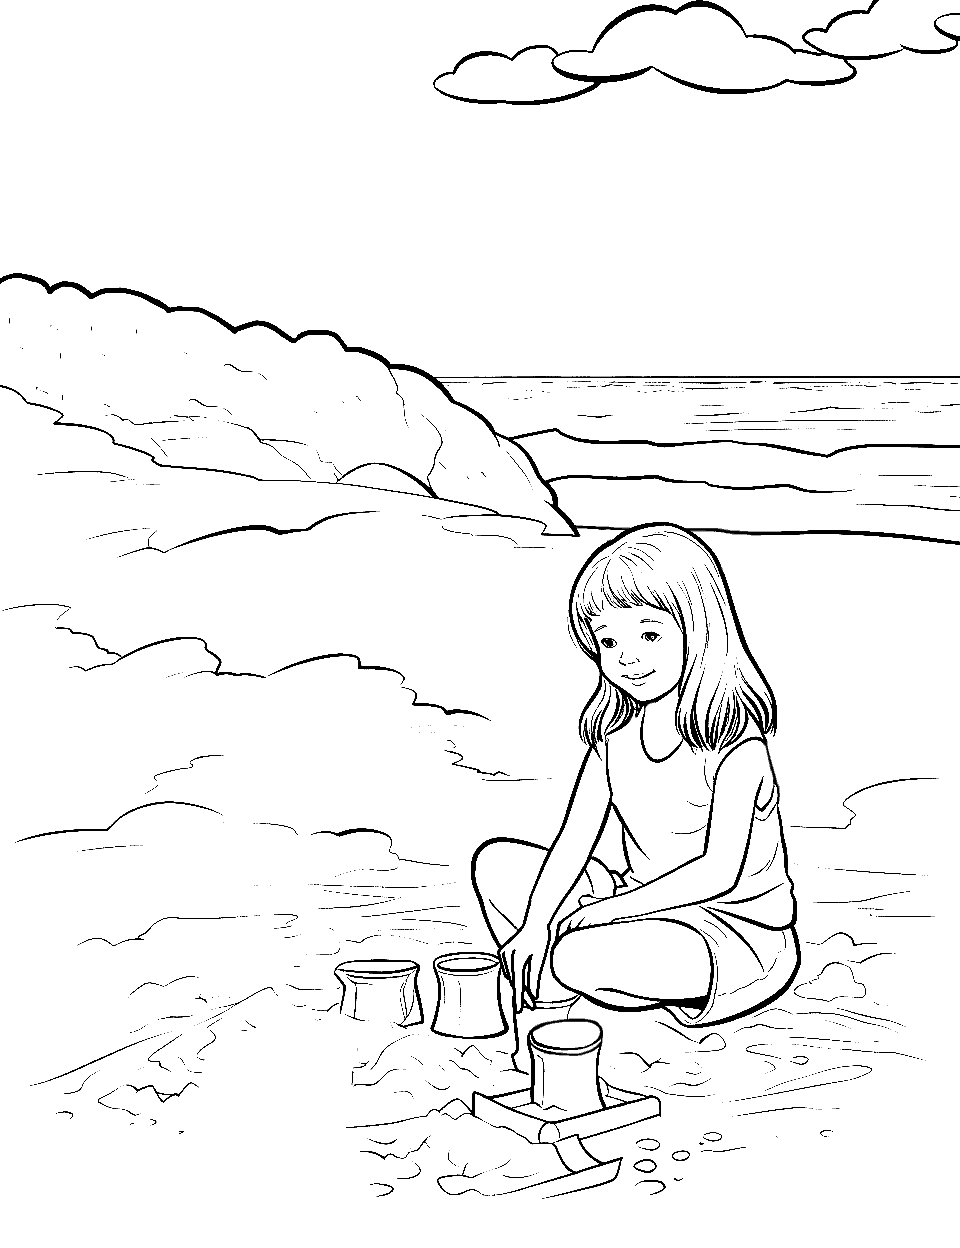 Girl Building a Sand Castle Coloring Page - A young girl busily building a sturdy sand castle on the serene beach.